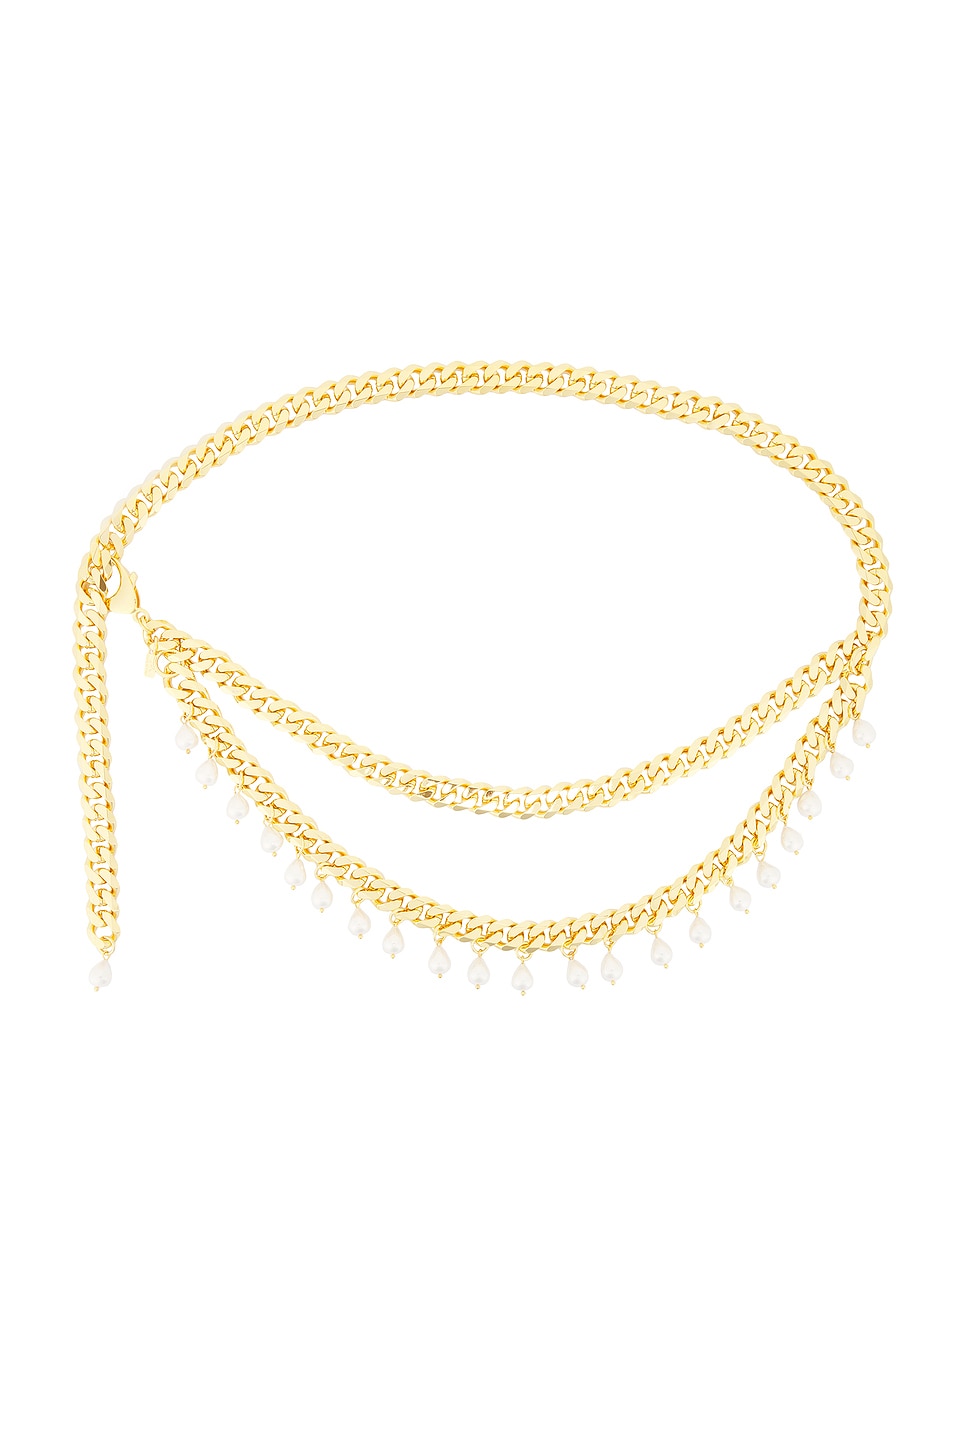 Rowen Rose Chain Belt With Pearl Pendants In Gold